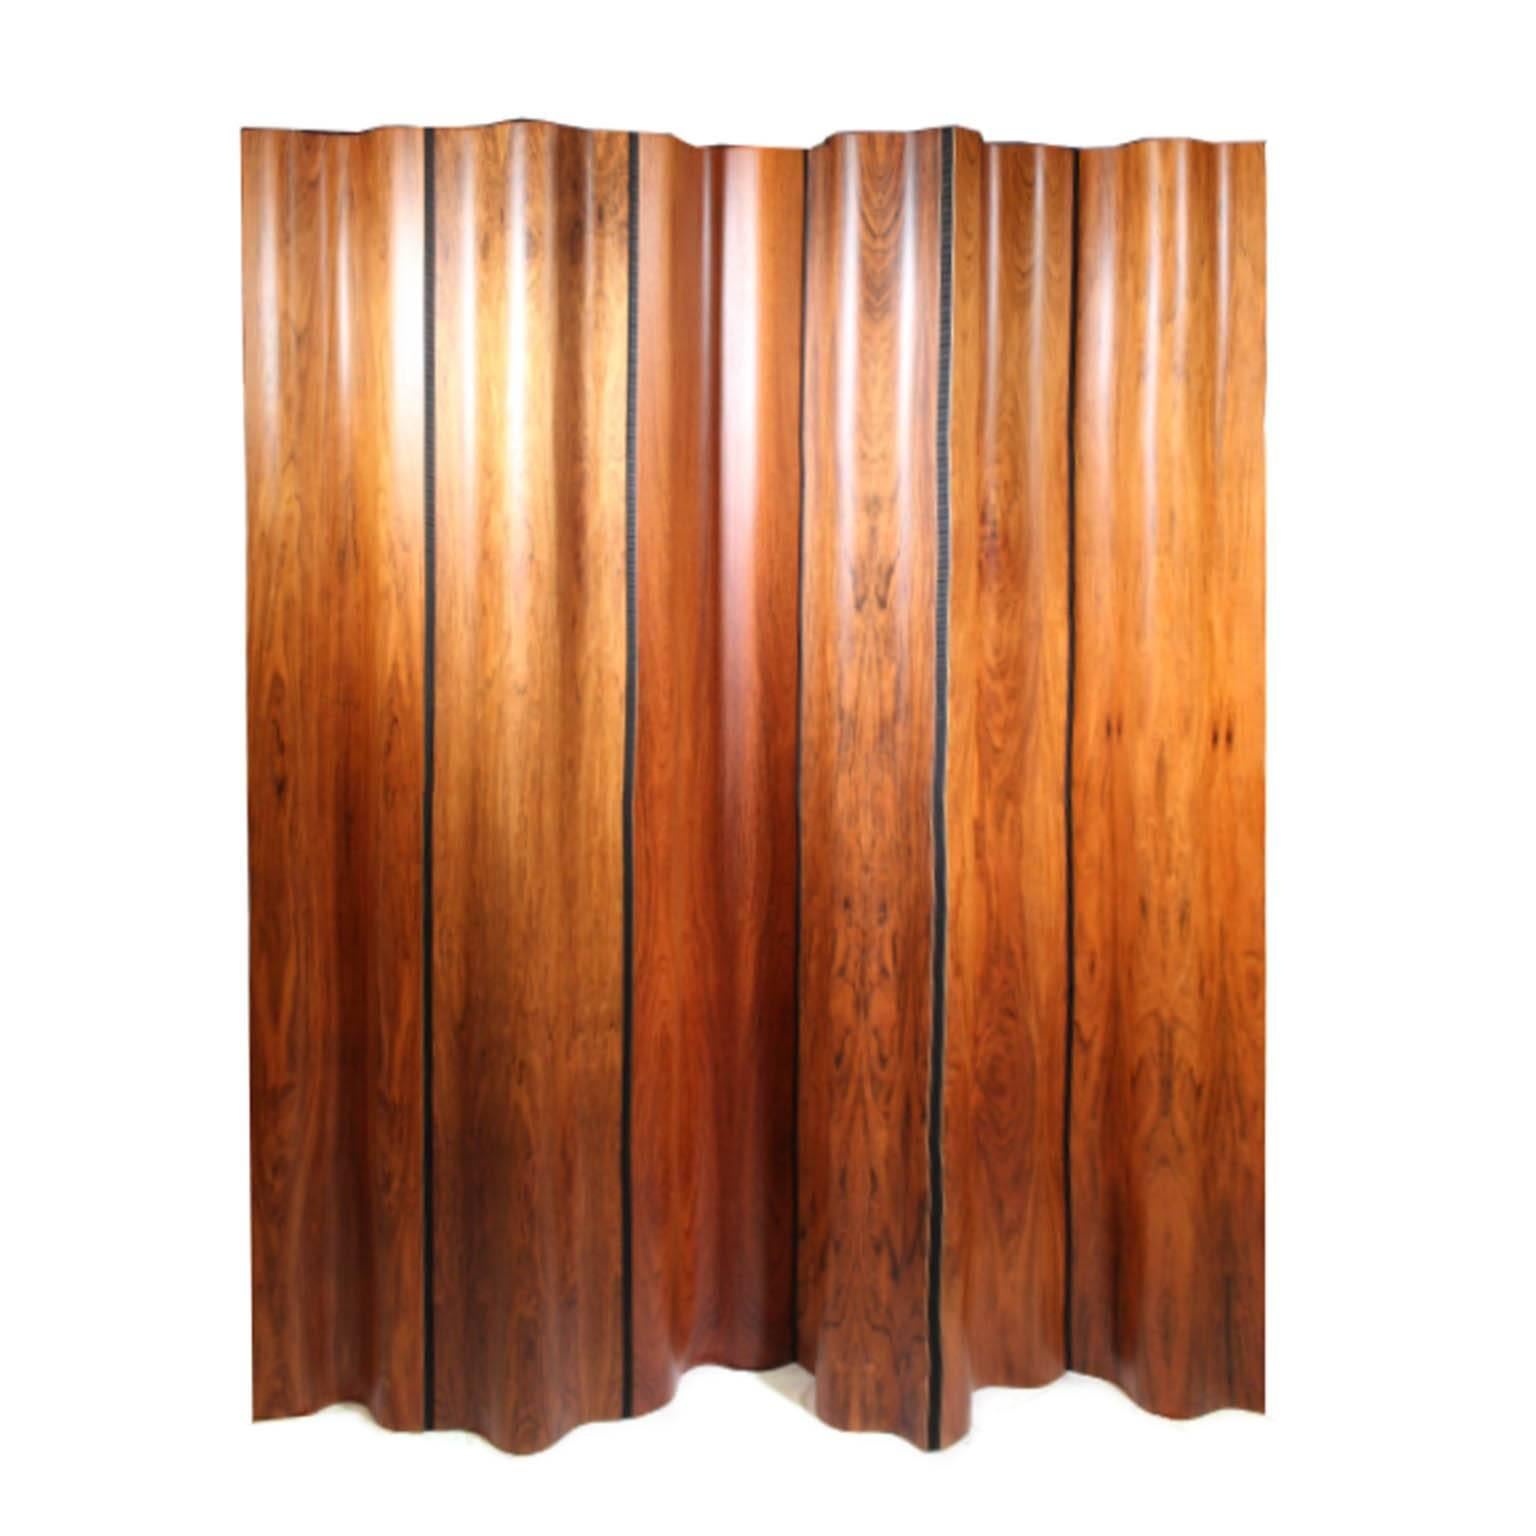 Bentwood six panel rosewood room divider. Special edition, this is number 203 of 500 that Herman Miller produced in 1992 when a buried stockpile of old growth Brazilian rosewood was discovered at the Herman Miller manufacturing plant. Signed as